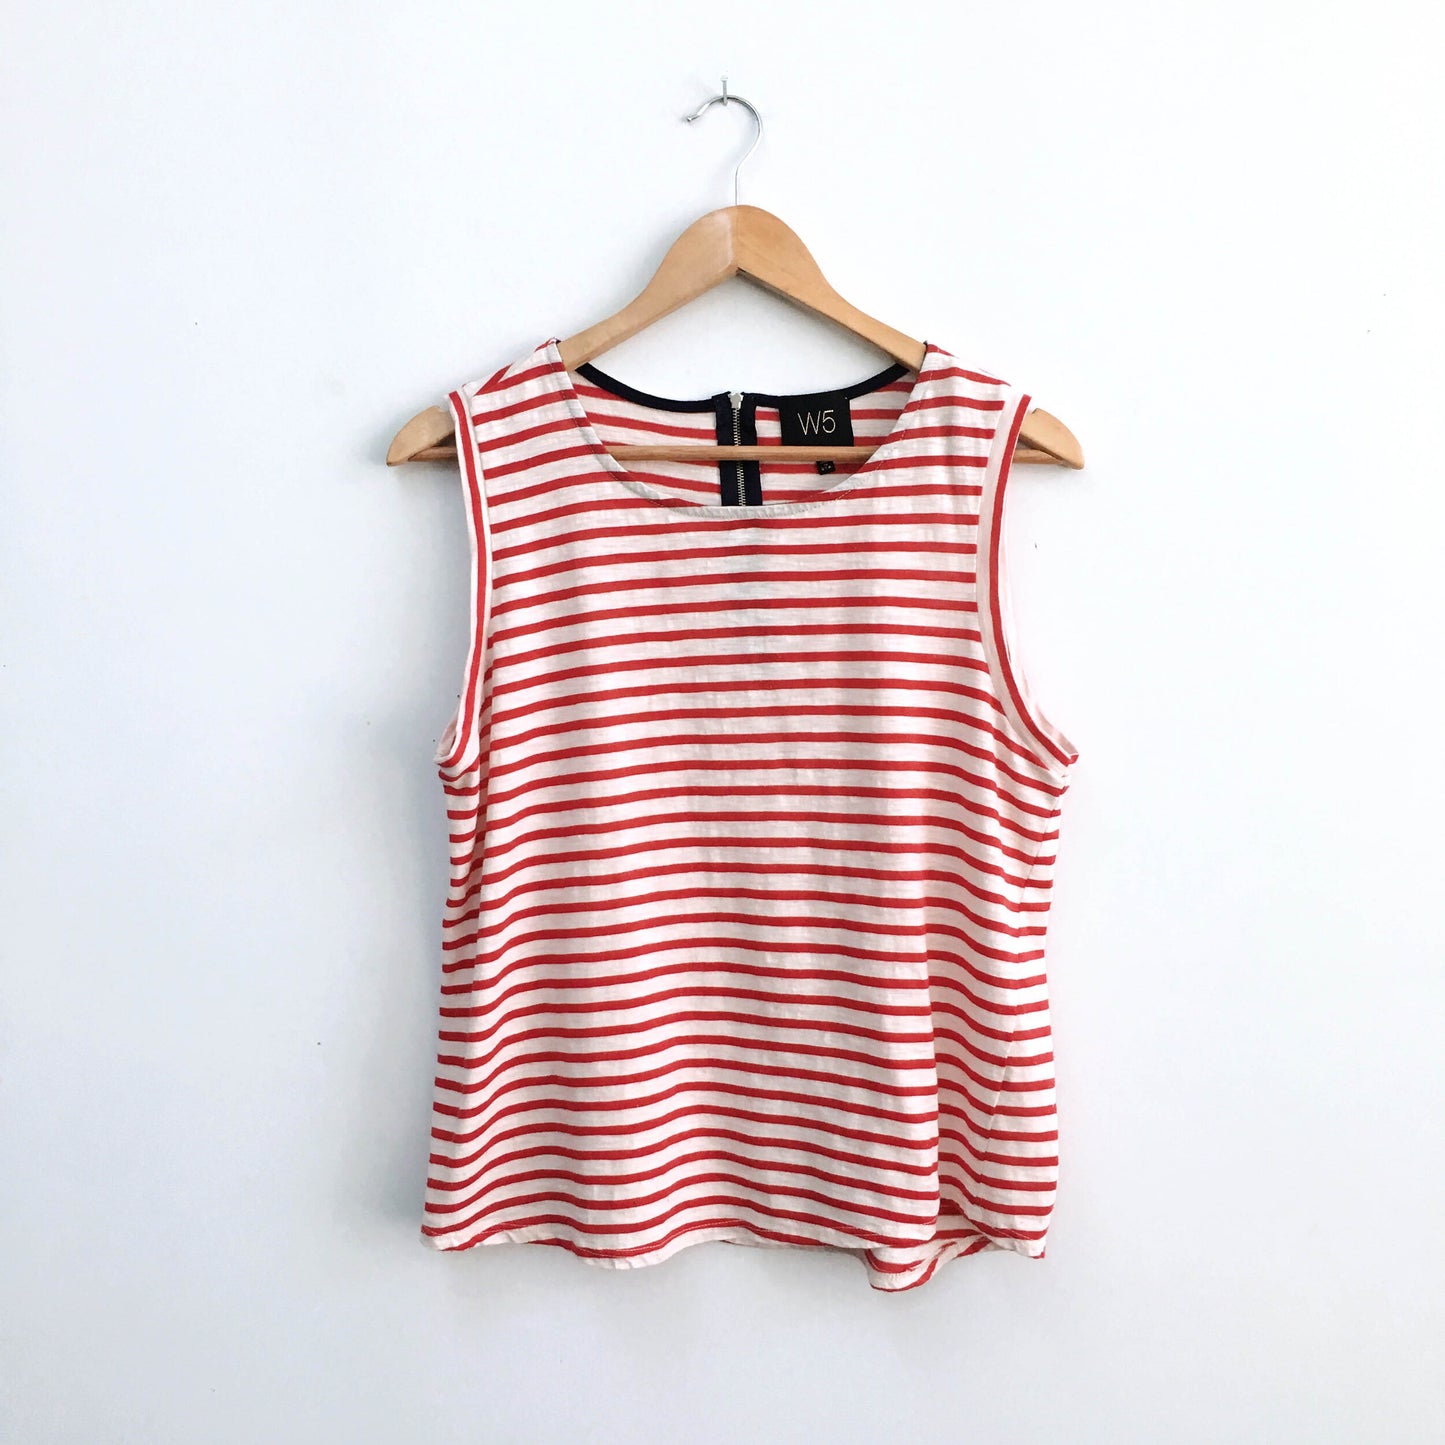 W5 Concepts Anthropologie striped tank - size Large